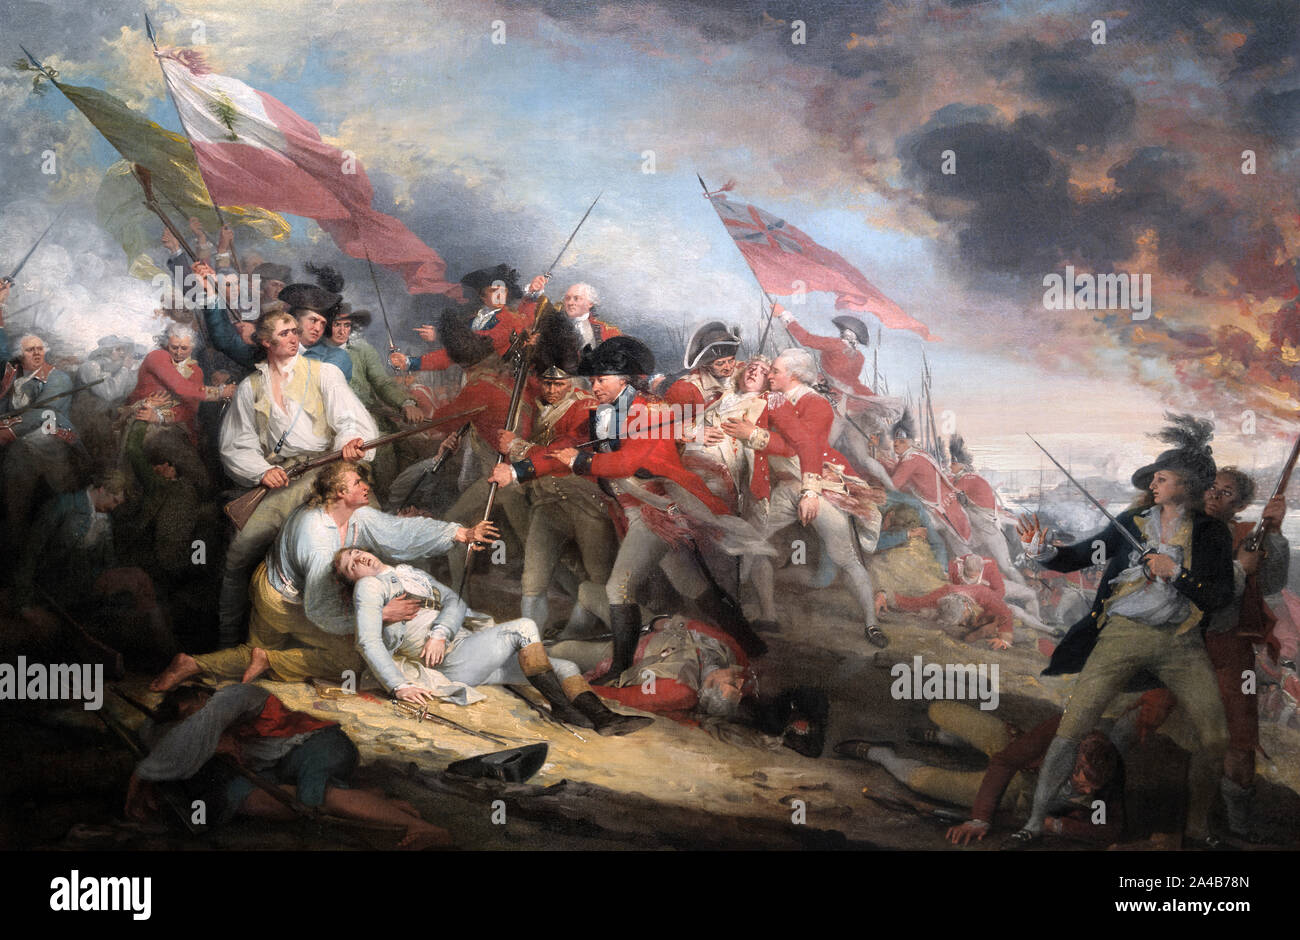 The Battle of Bunker Hill, June 17, 1775 by John Trumbull, oil on canvas, 1786. The painting depicts the moment when American Major General Joseph Warren was mortally wounded by a musket ball and is saved from being bayonetted by British Major John Small. Stock Photo